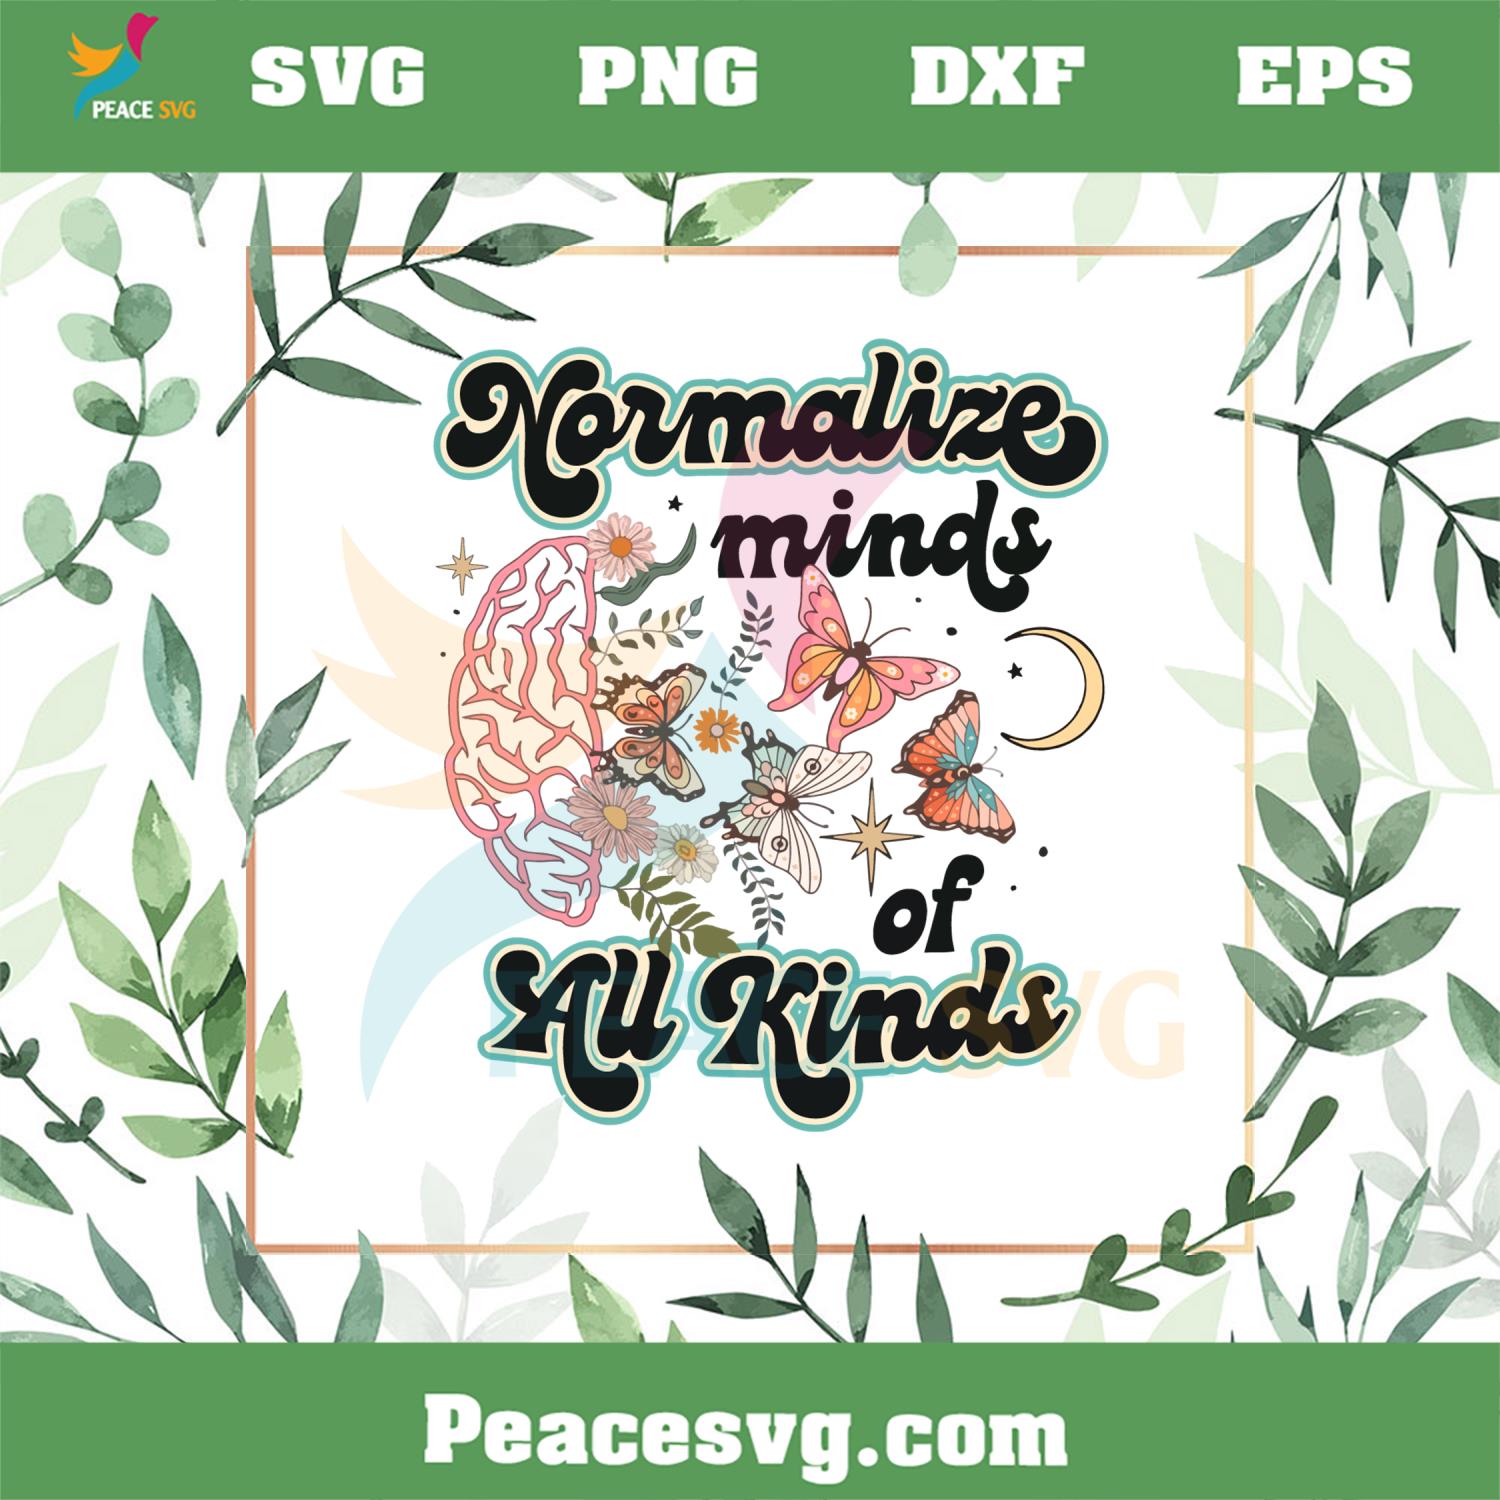 Normalize Minds Of All Kinds SVG Autism Awareness Brain Floral Butterfly SVG